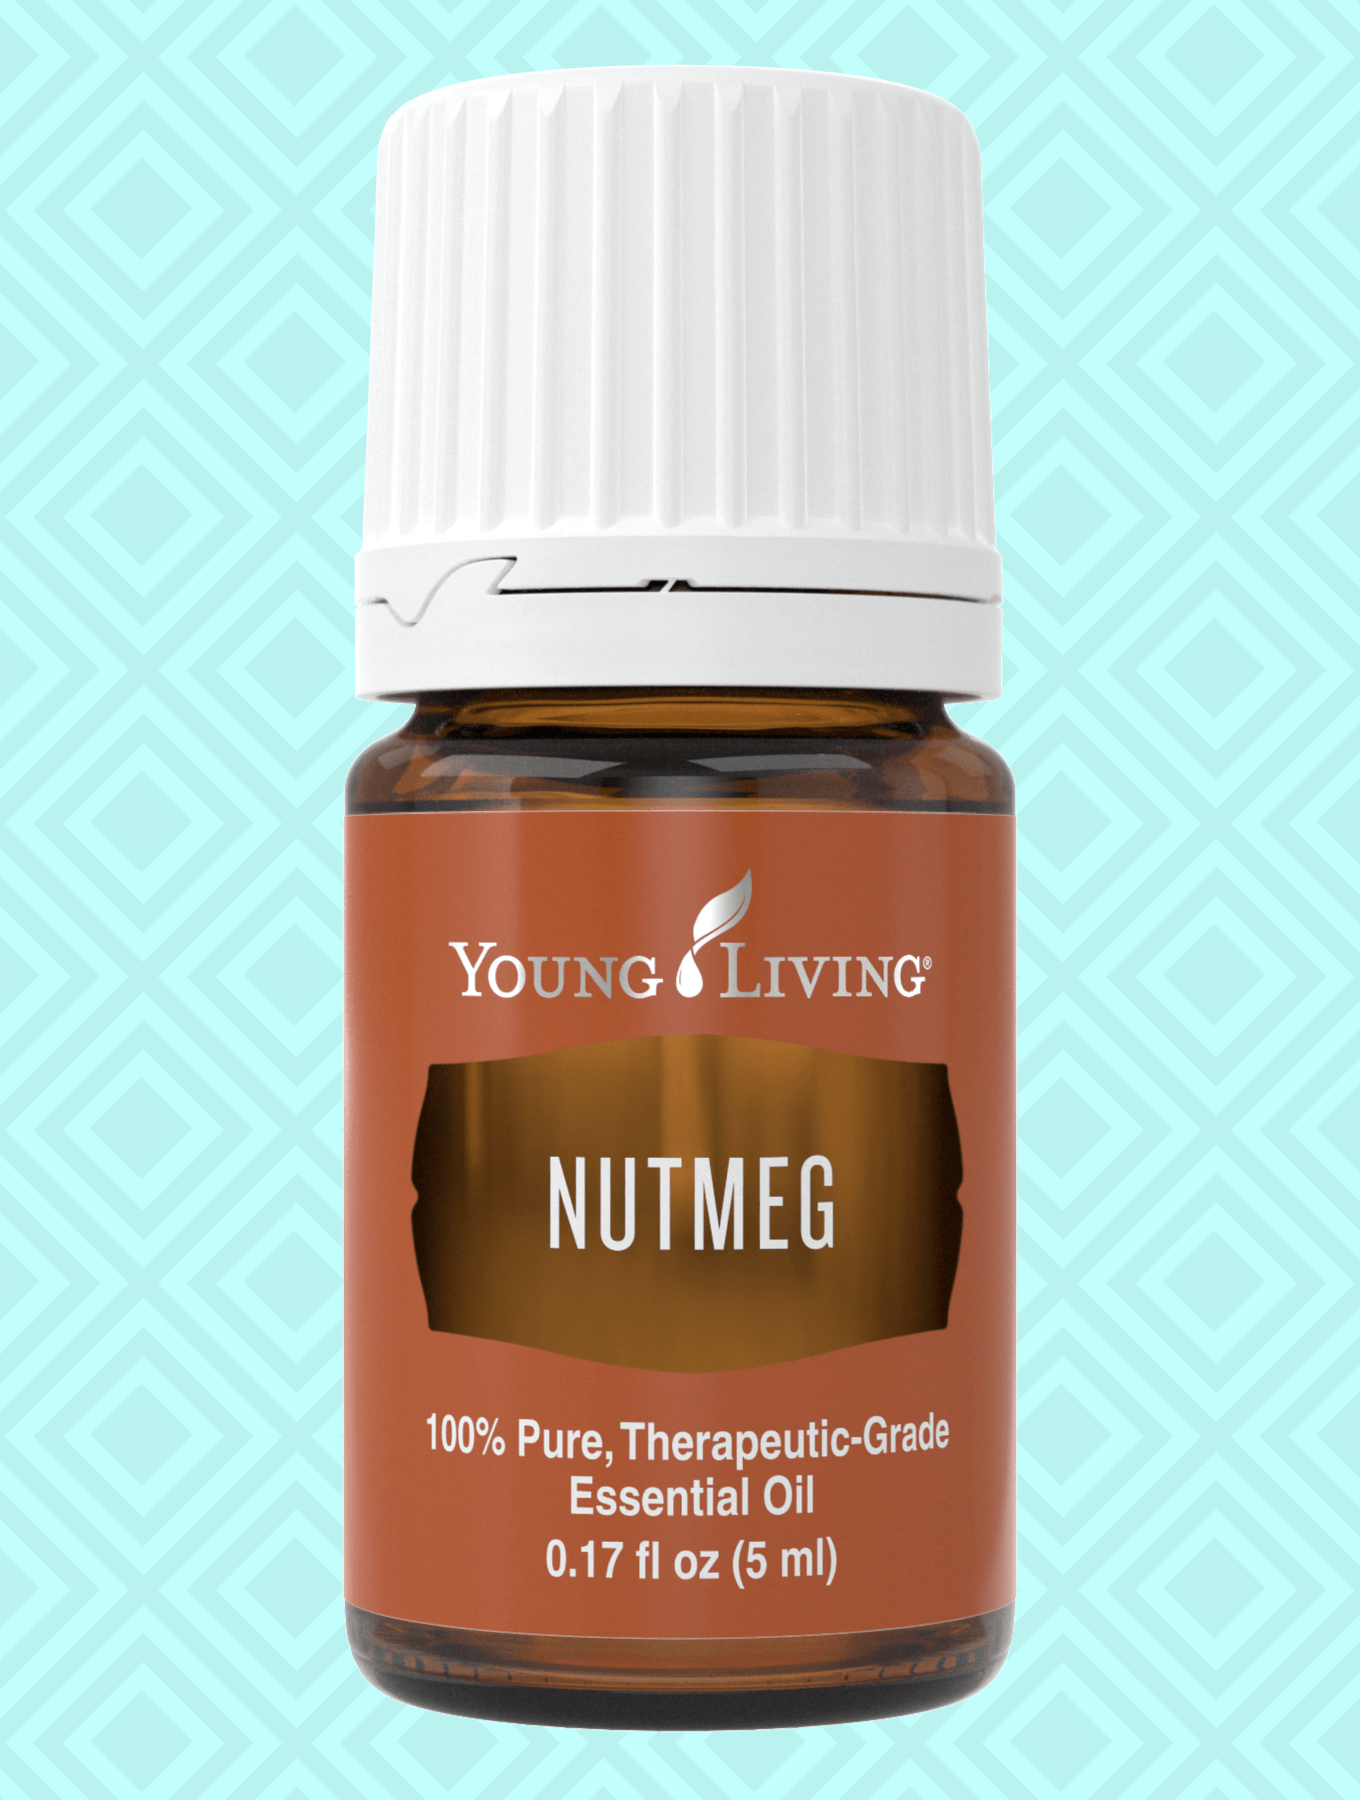 Nutmeg Essential Oil- The Energizer! - A Real Food Journey